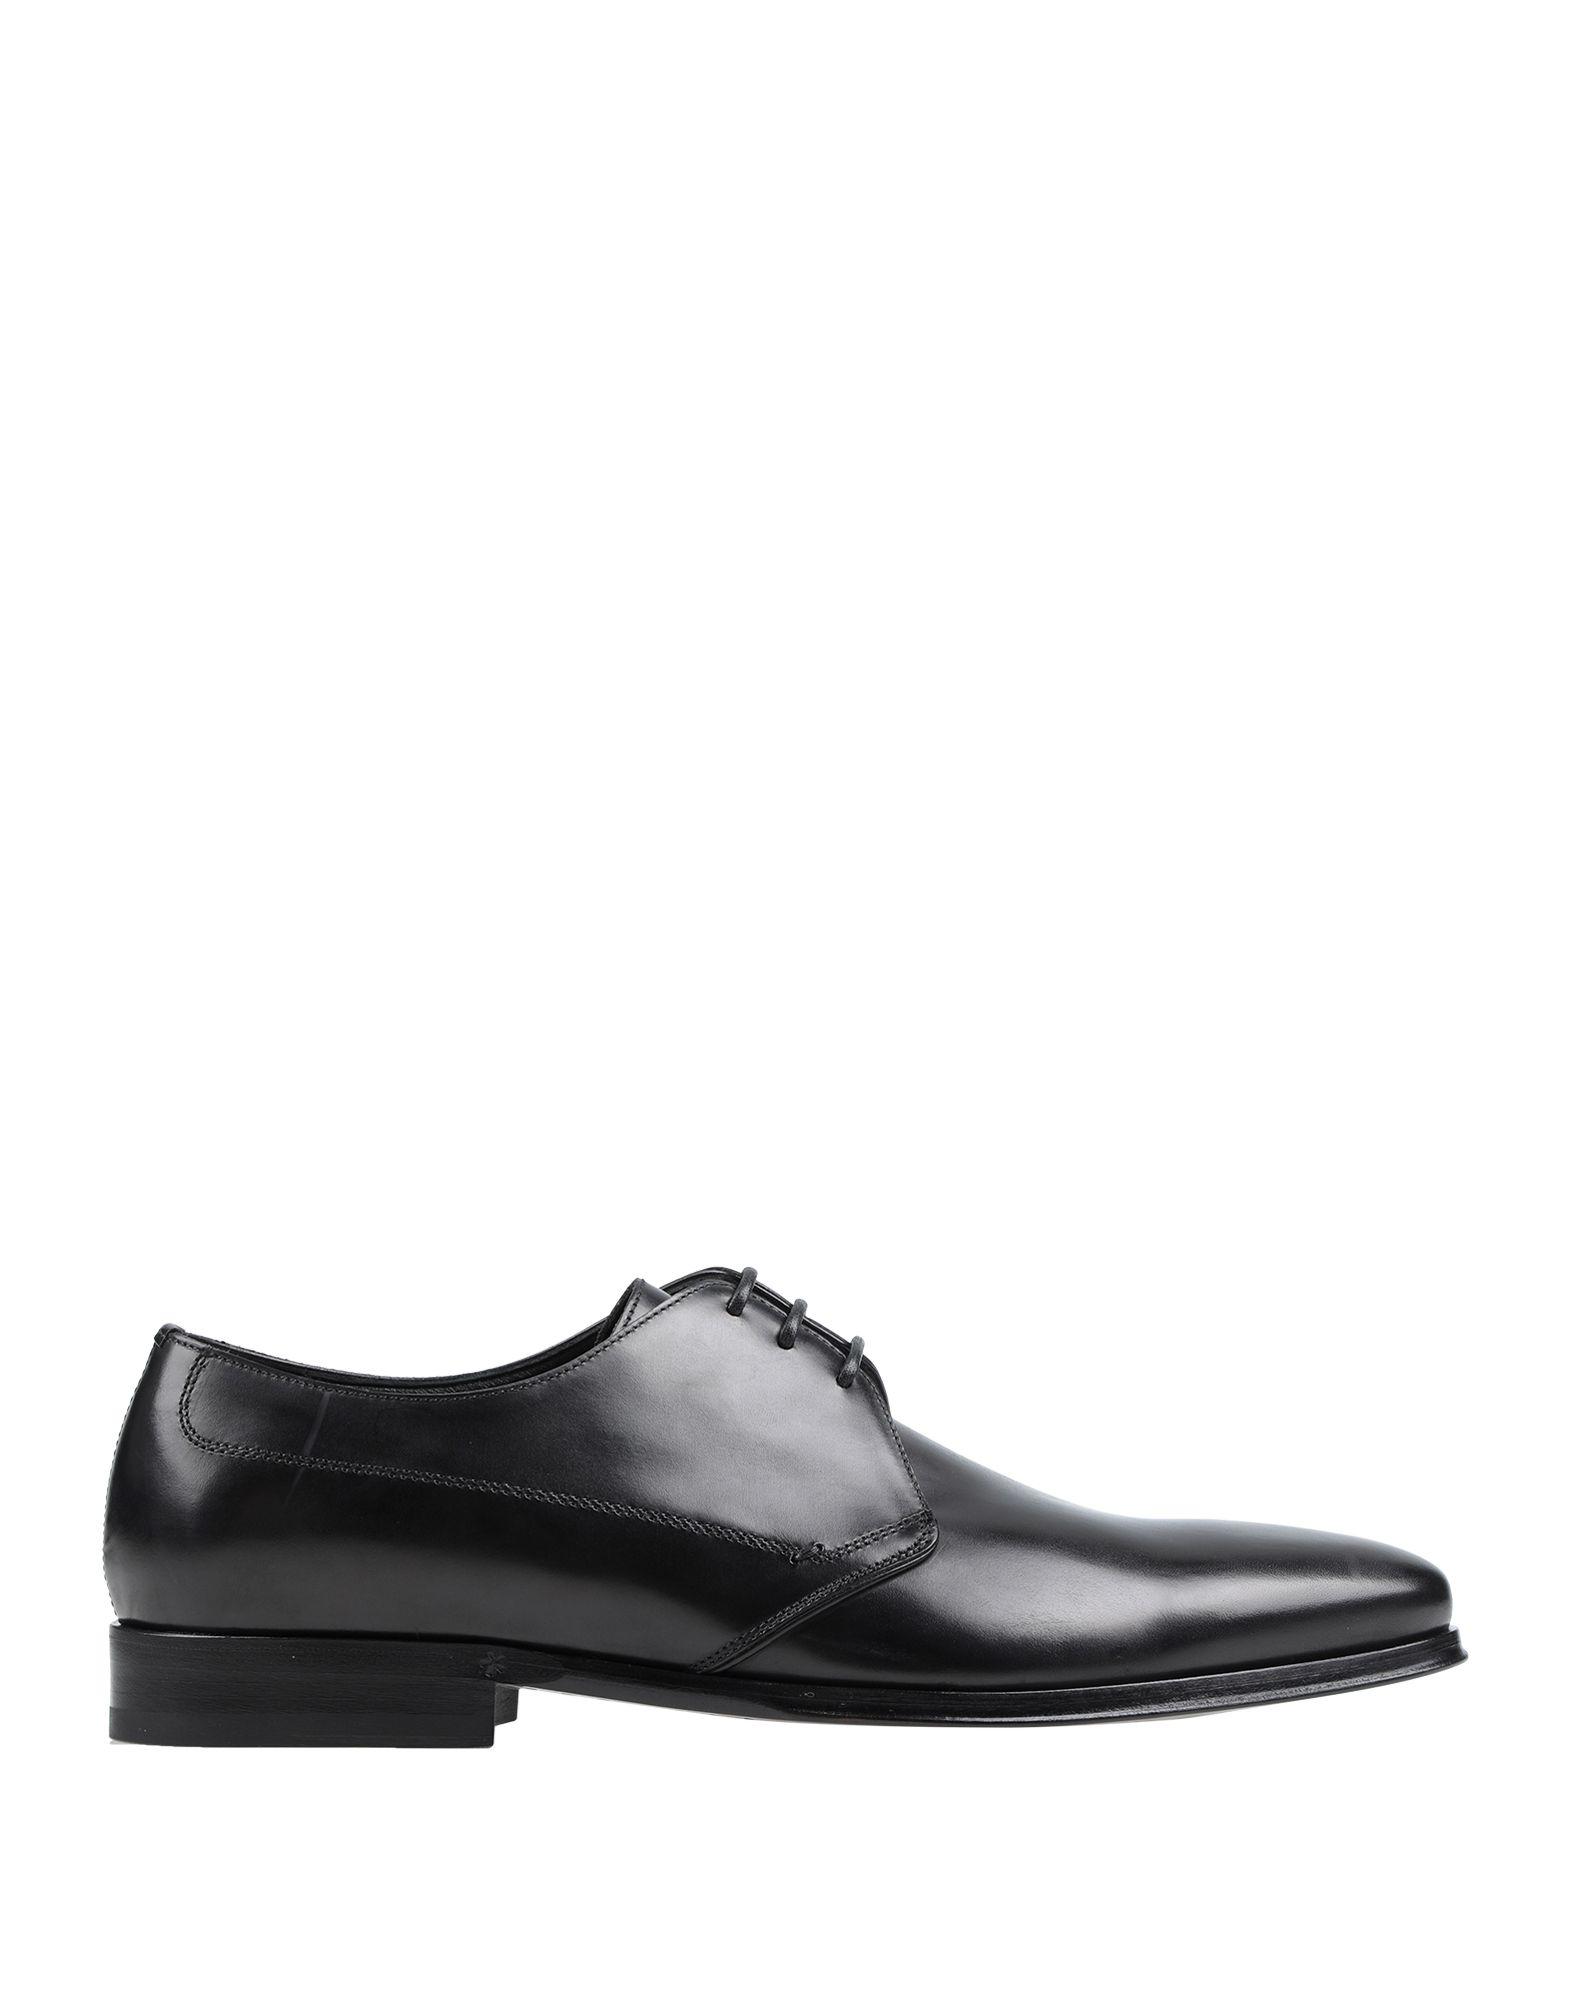 Dolce & Gabbana Leather Lace-up Shoe in Black for Men - Lyst